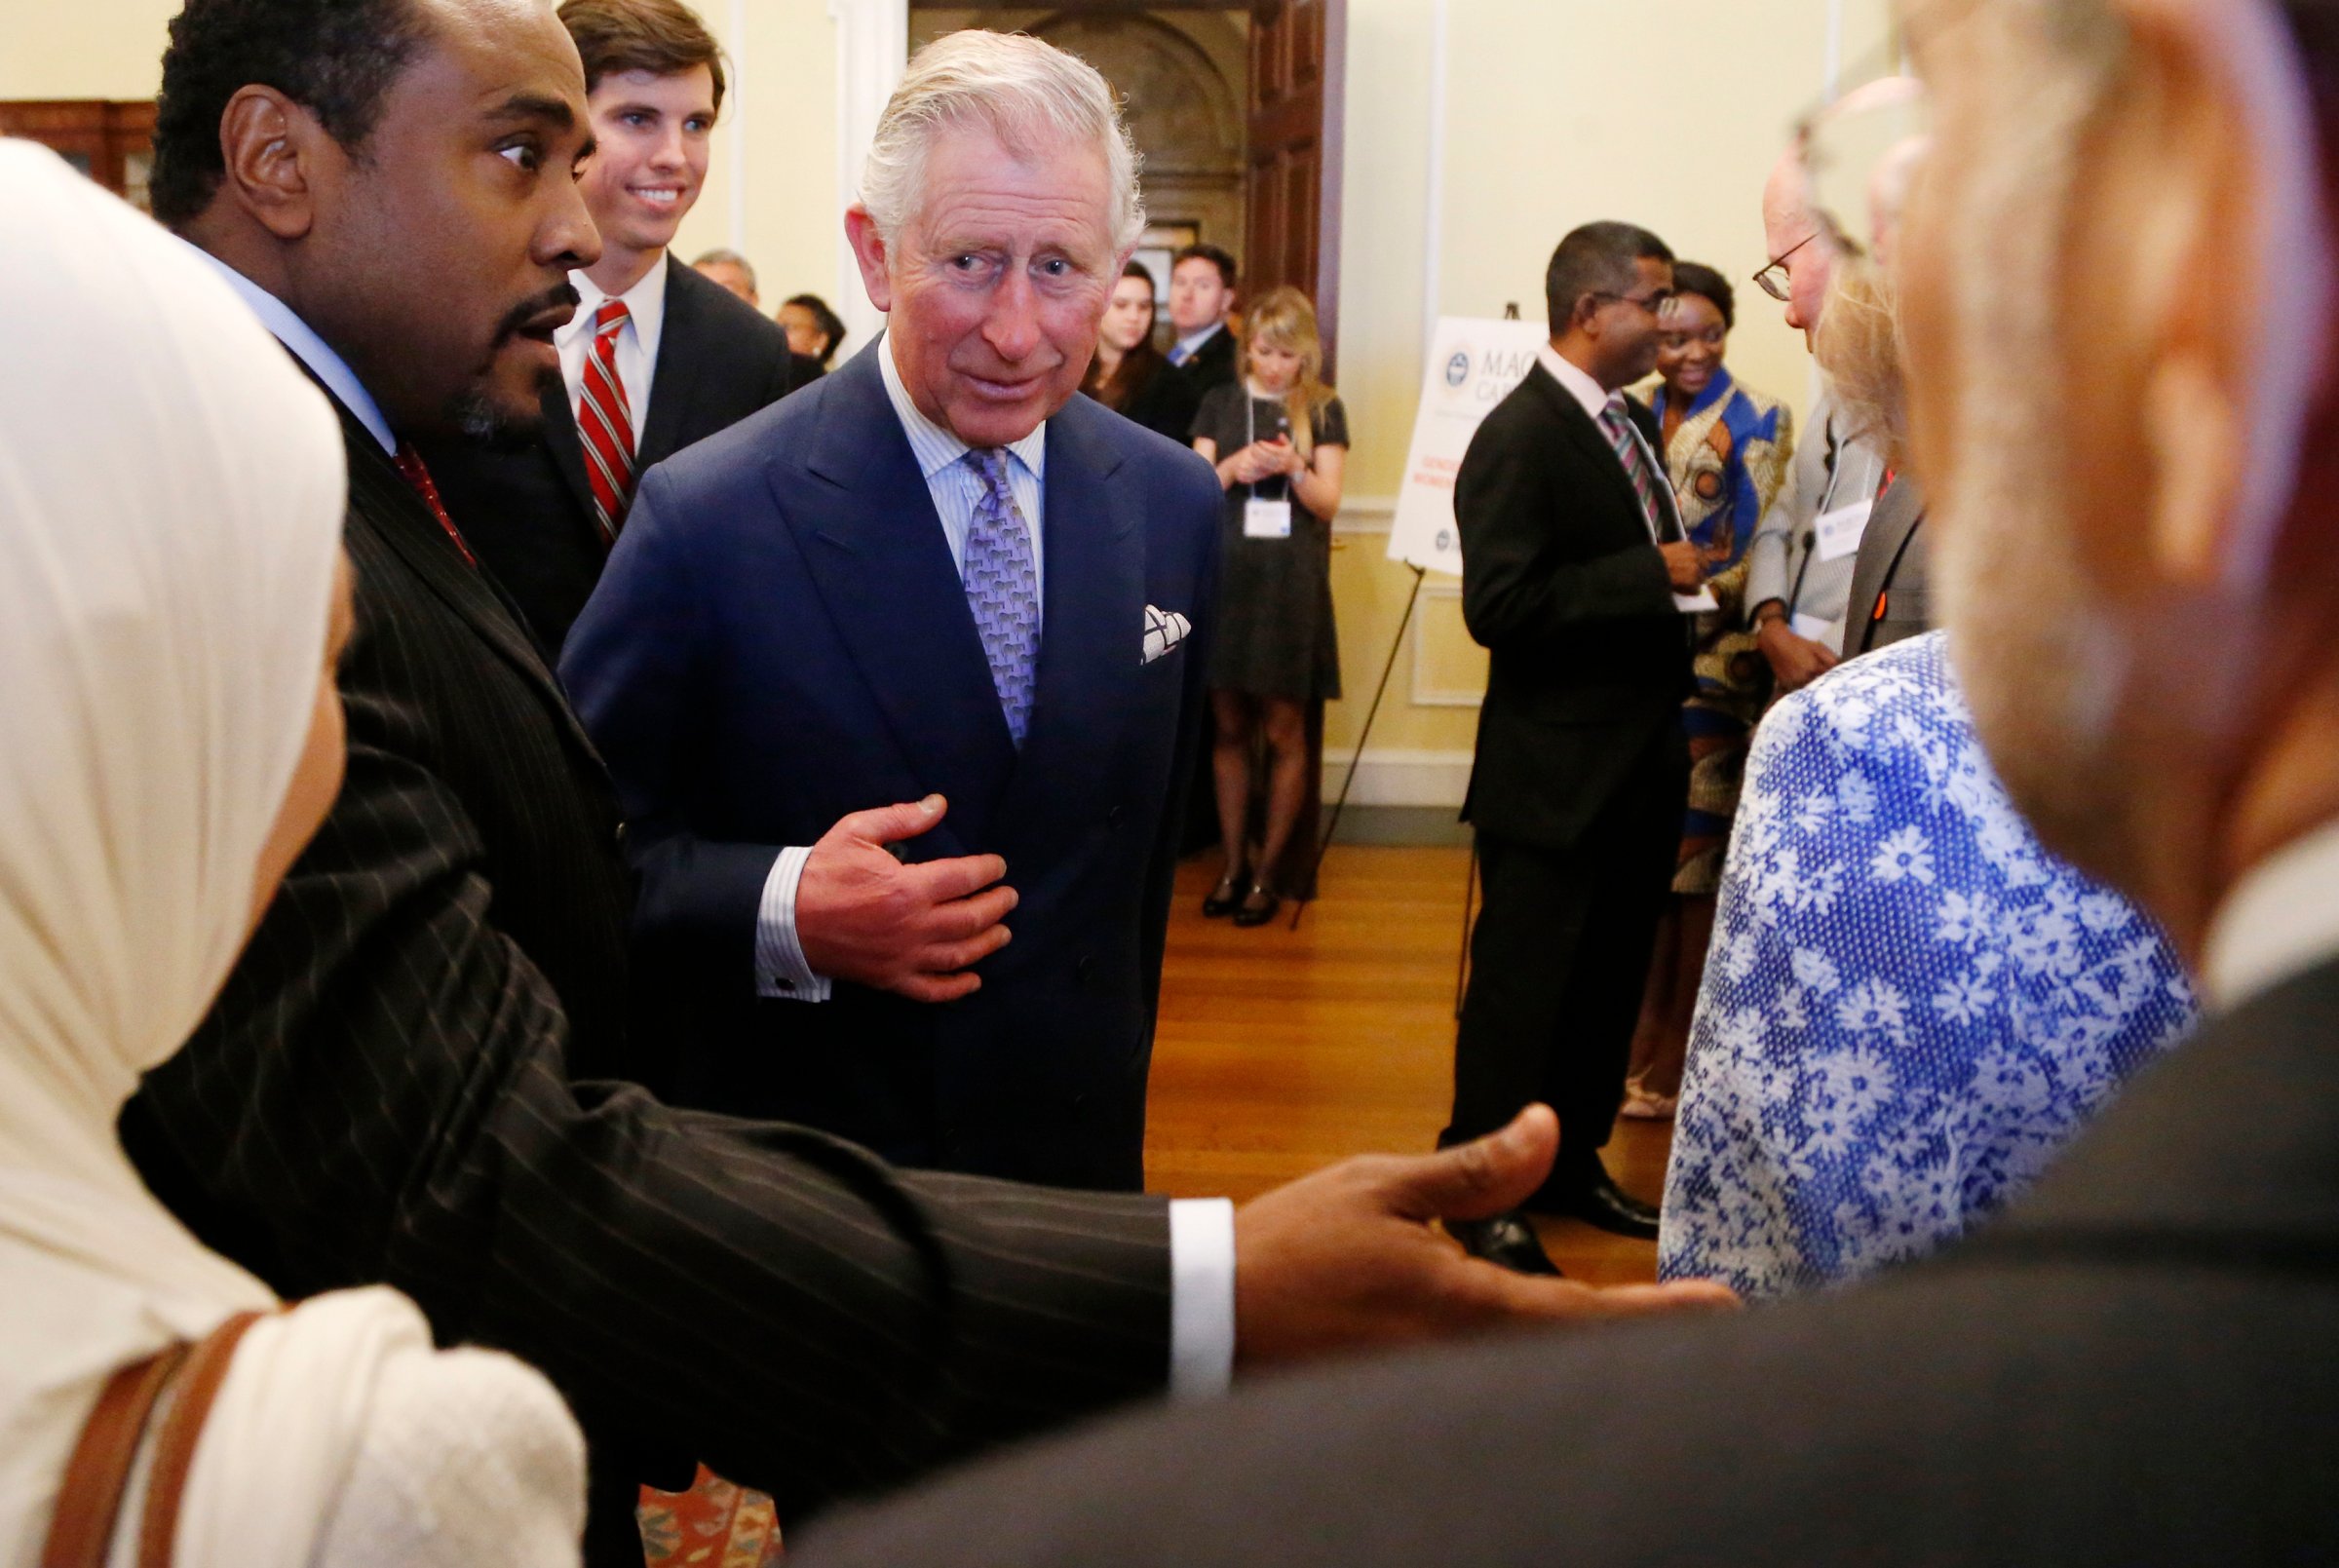 Britain's Prince Charles greets participants in a conference about the rule of law in the 21st century as he visits the National Archives in Washington